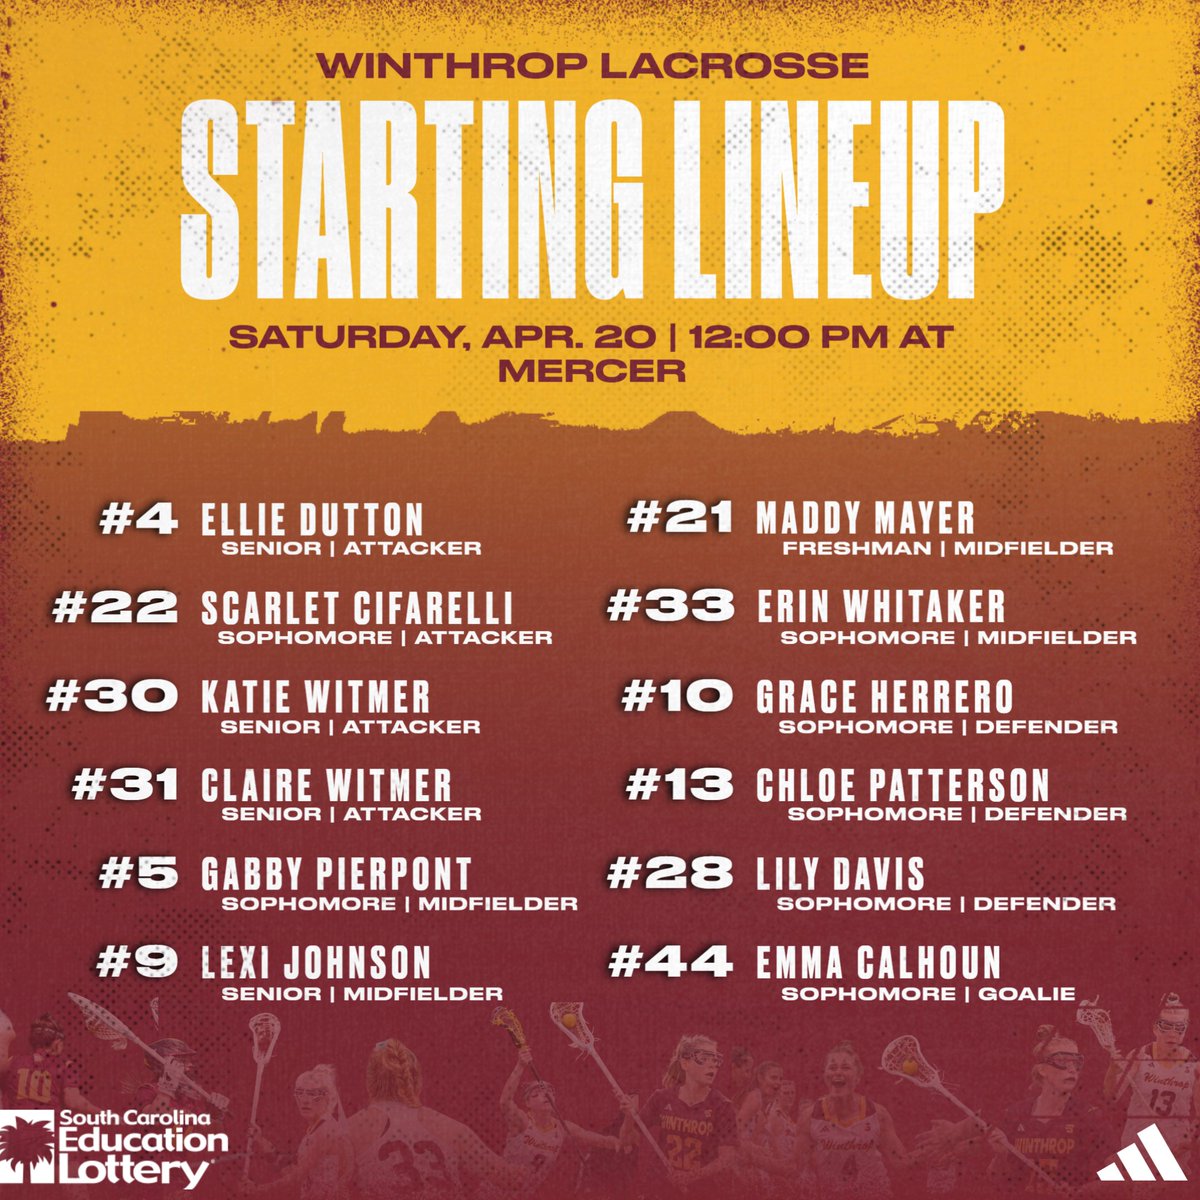 We are underway from Macon, Ga.! 

#ROCKtheHILL | #BigSouthLax